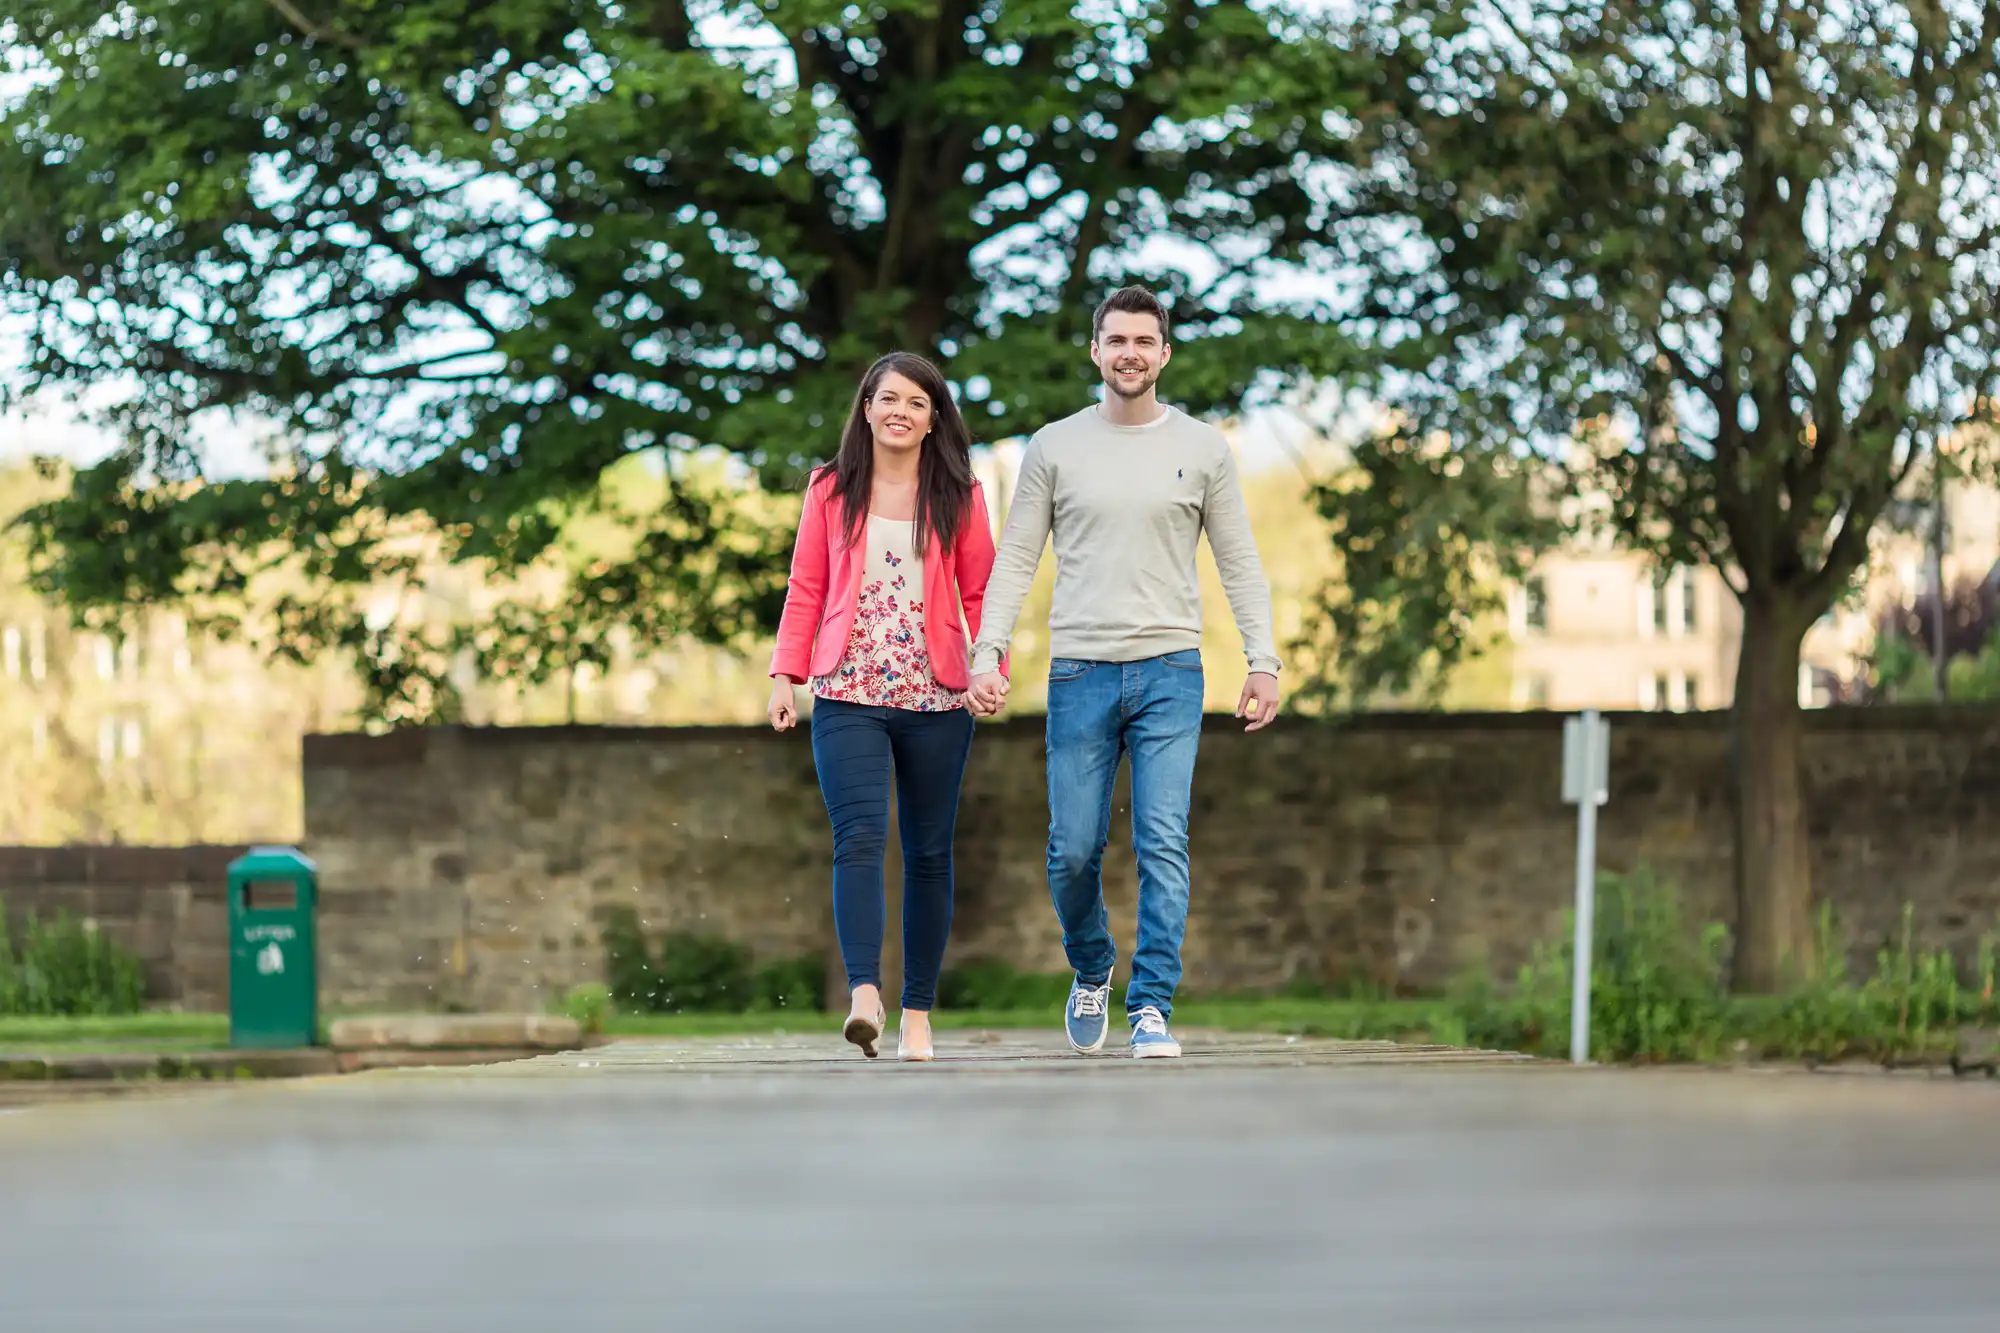 A young couple holding hands and smiling while walking on a paved path in a park with trees in the background.